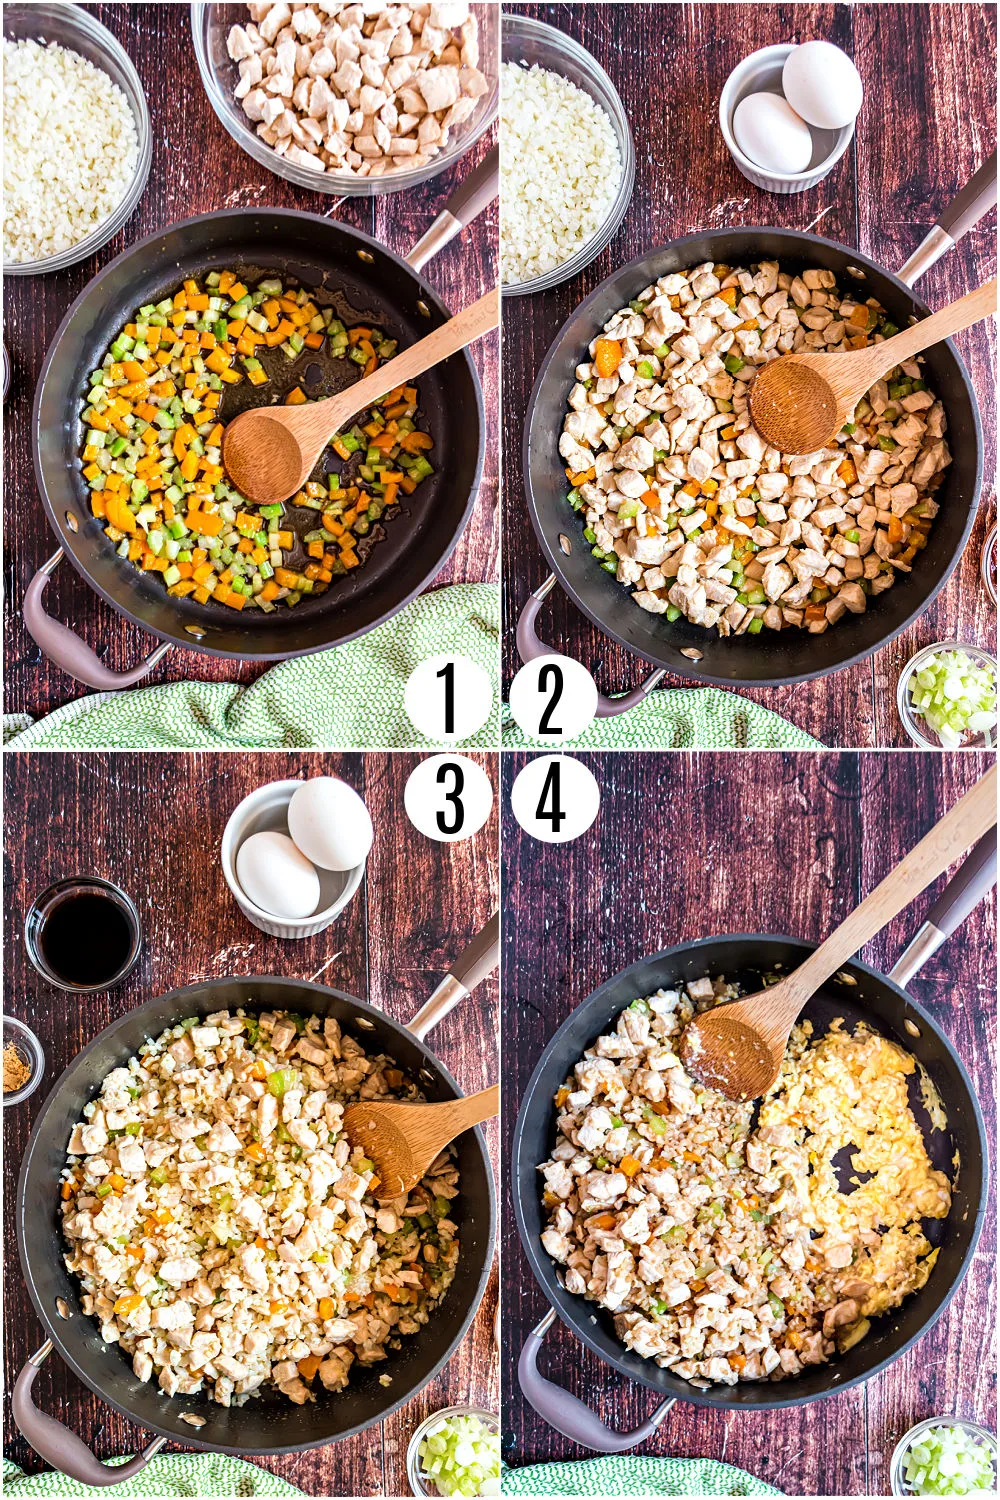 Step by step photos showing how to make cauliflower fried rice with chicken.